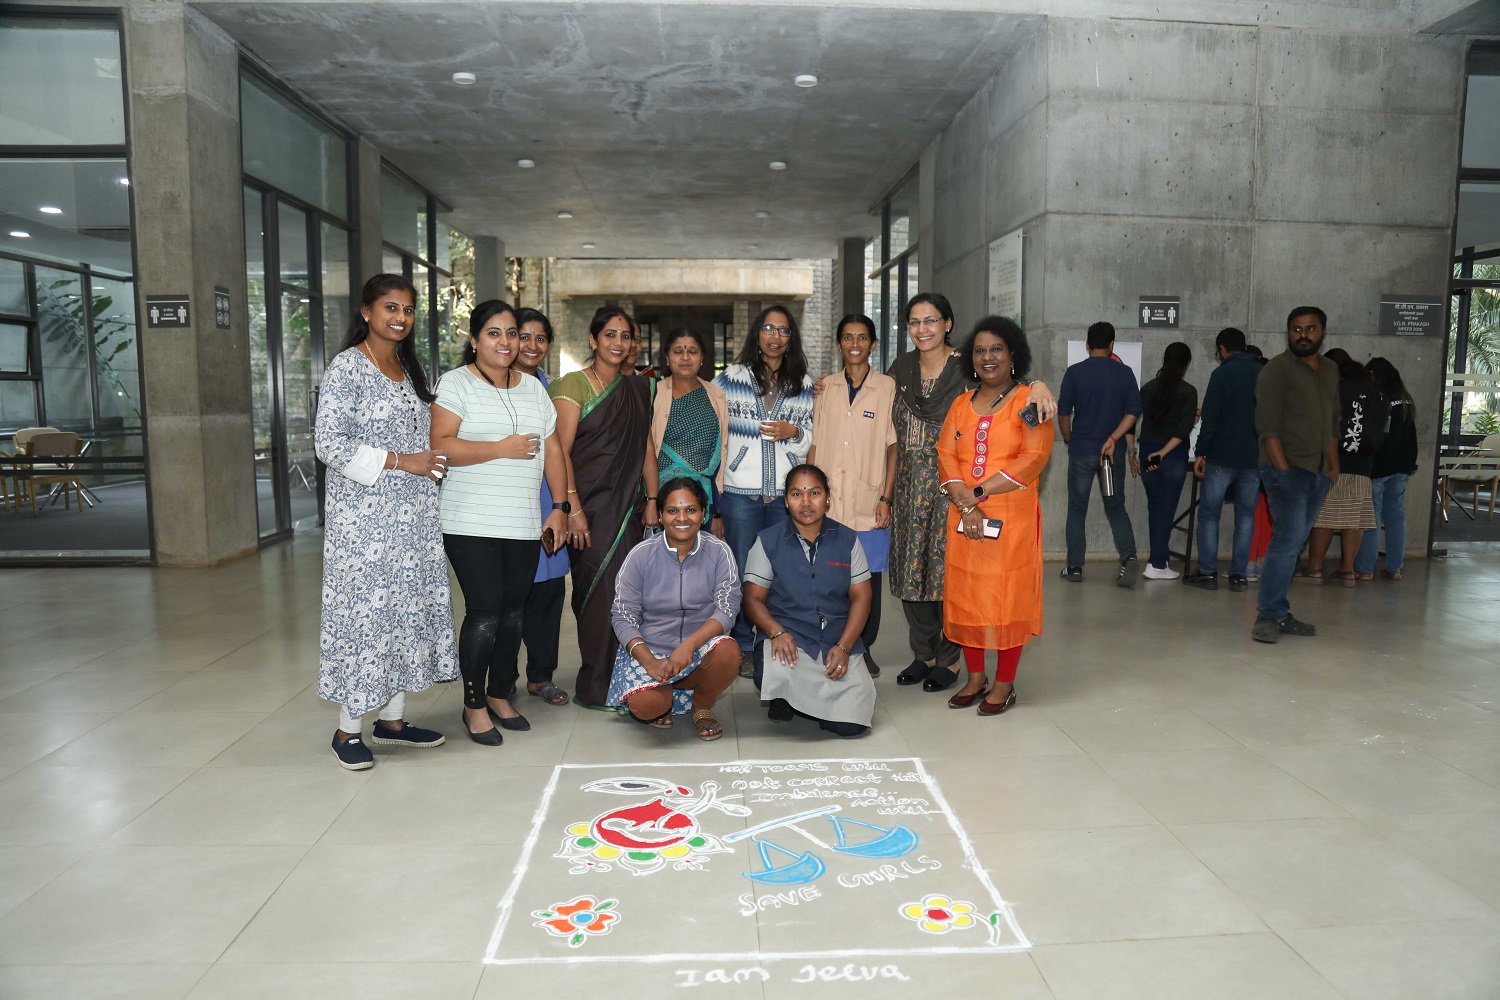 A few participants at the exhibition on Gender and Inclusivity at IIMB, on 13 January 2023.